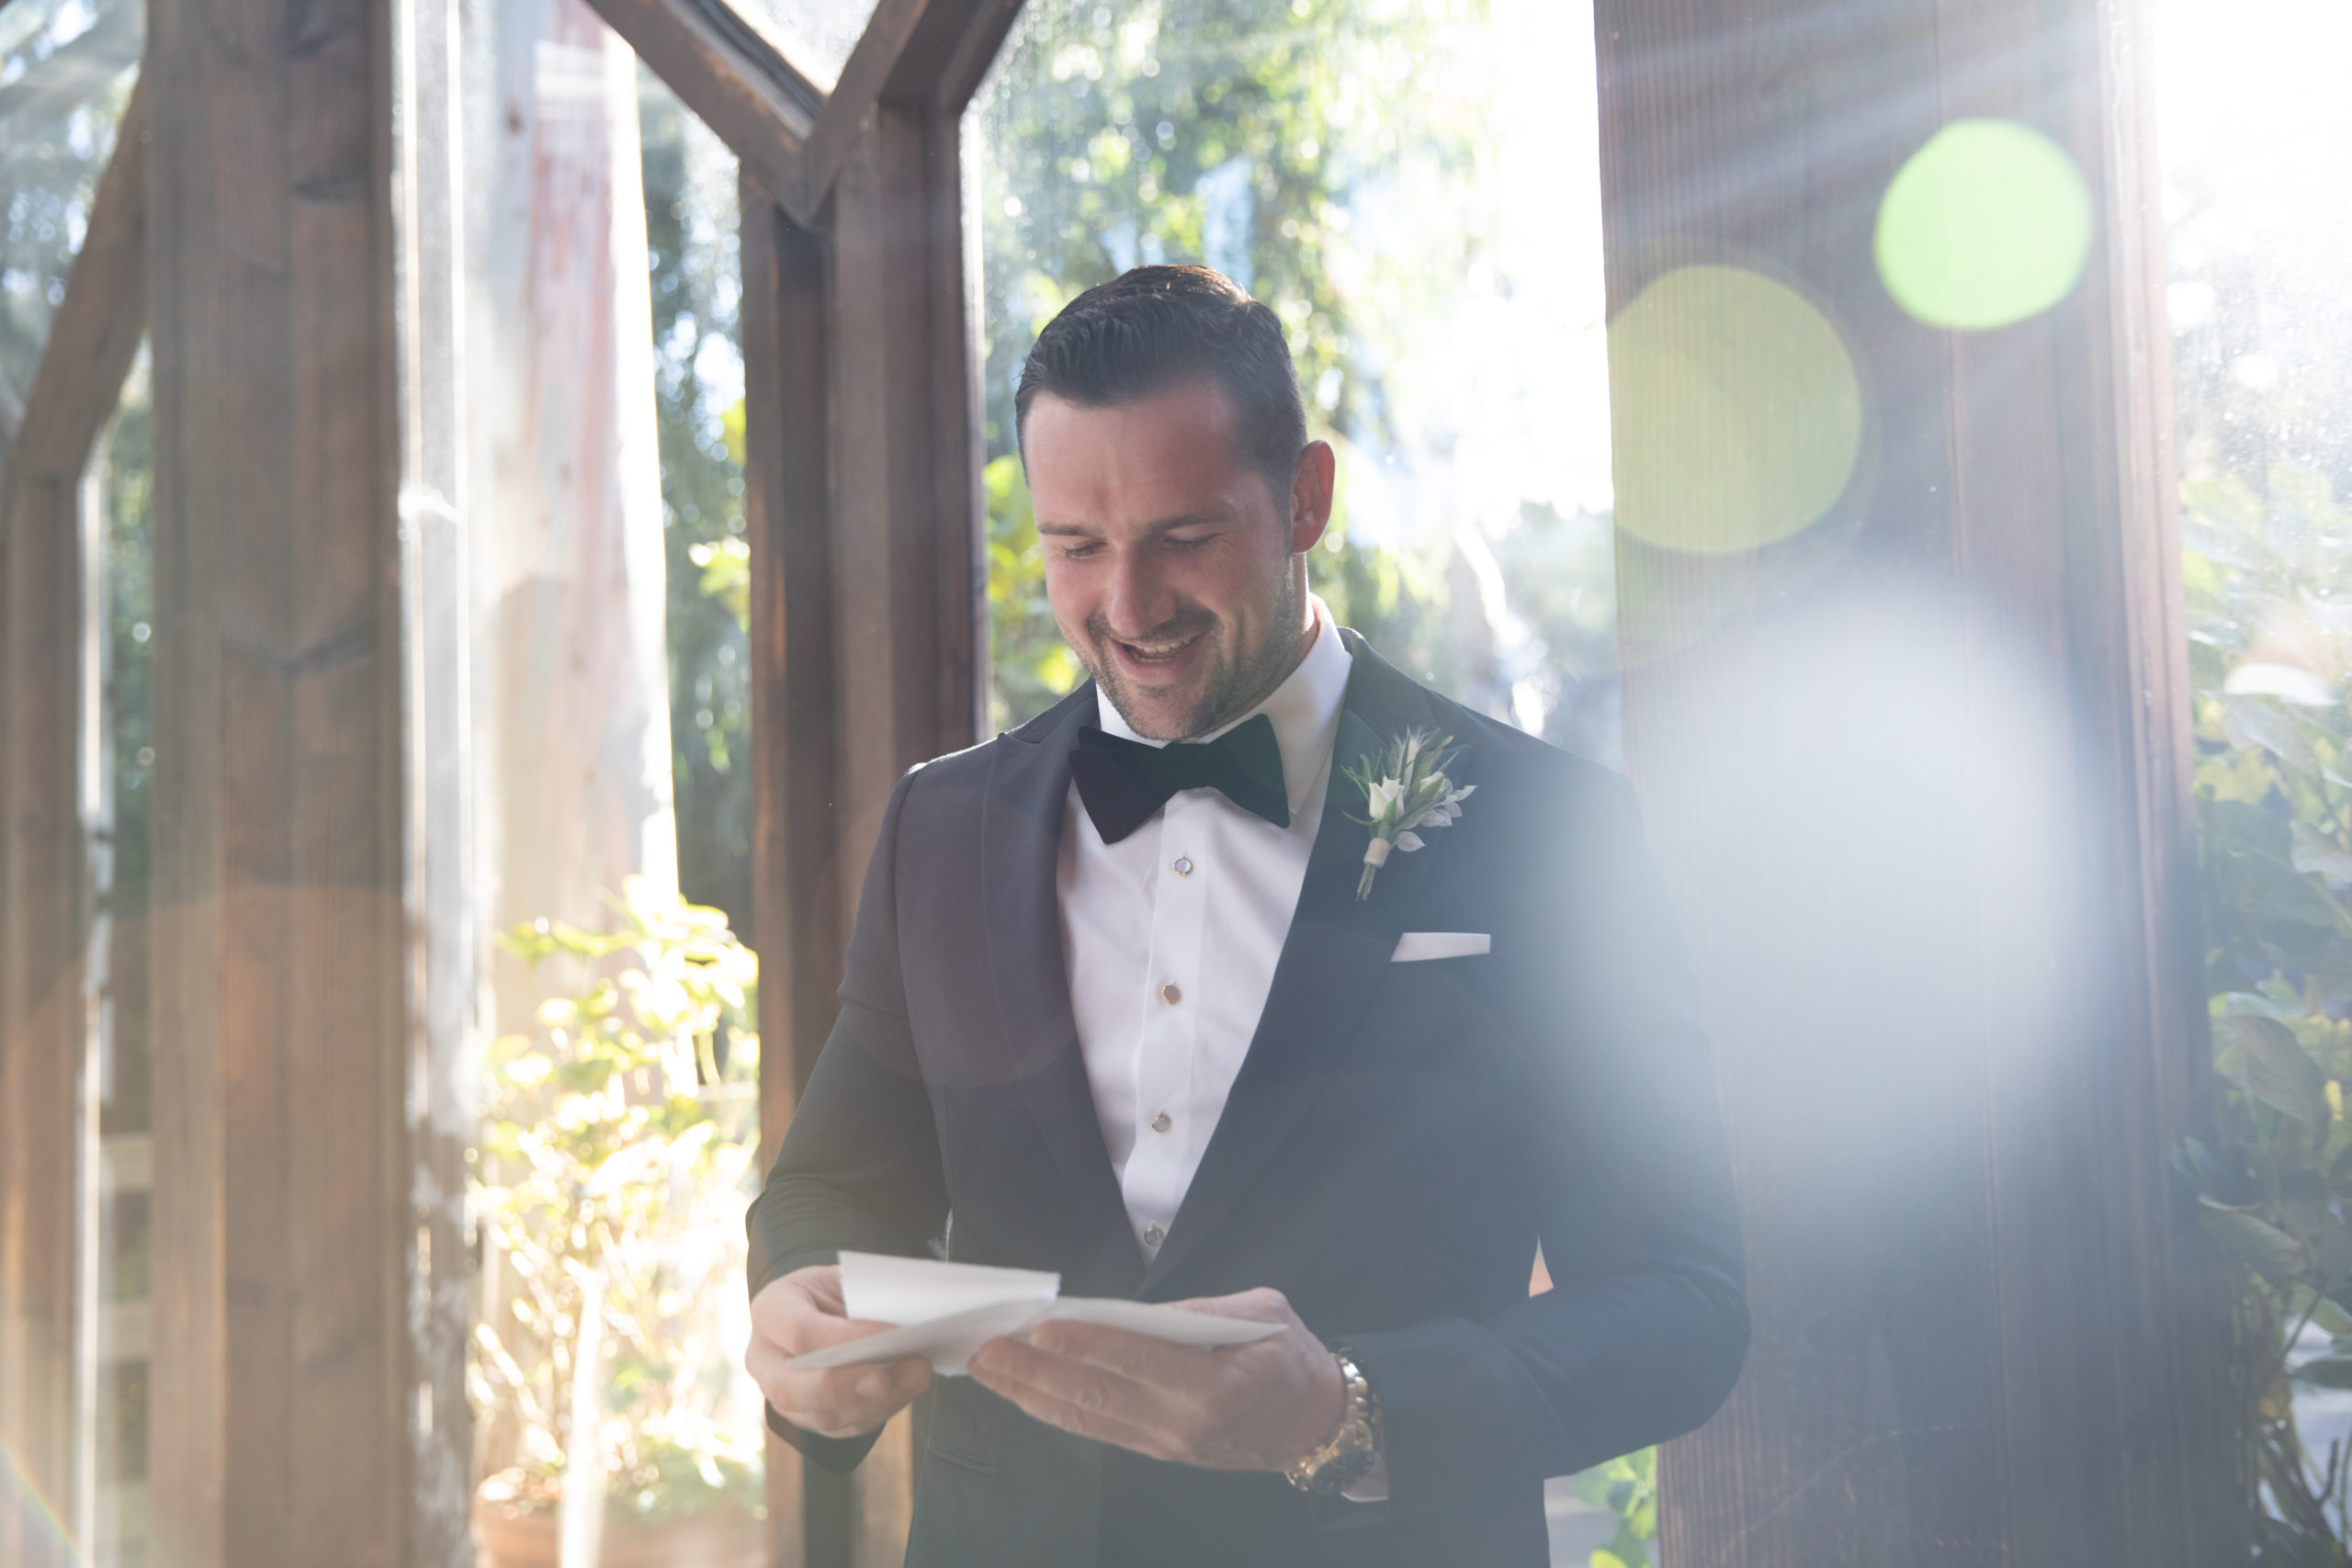 Groom getting ready on wedding day with light beaming through the window reading a letter from his bride smiling